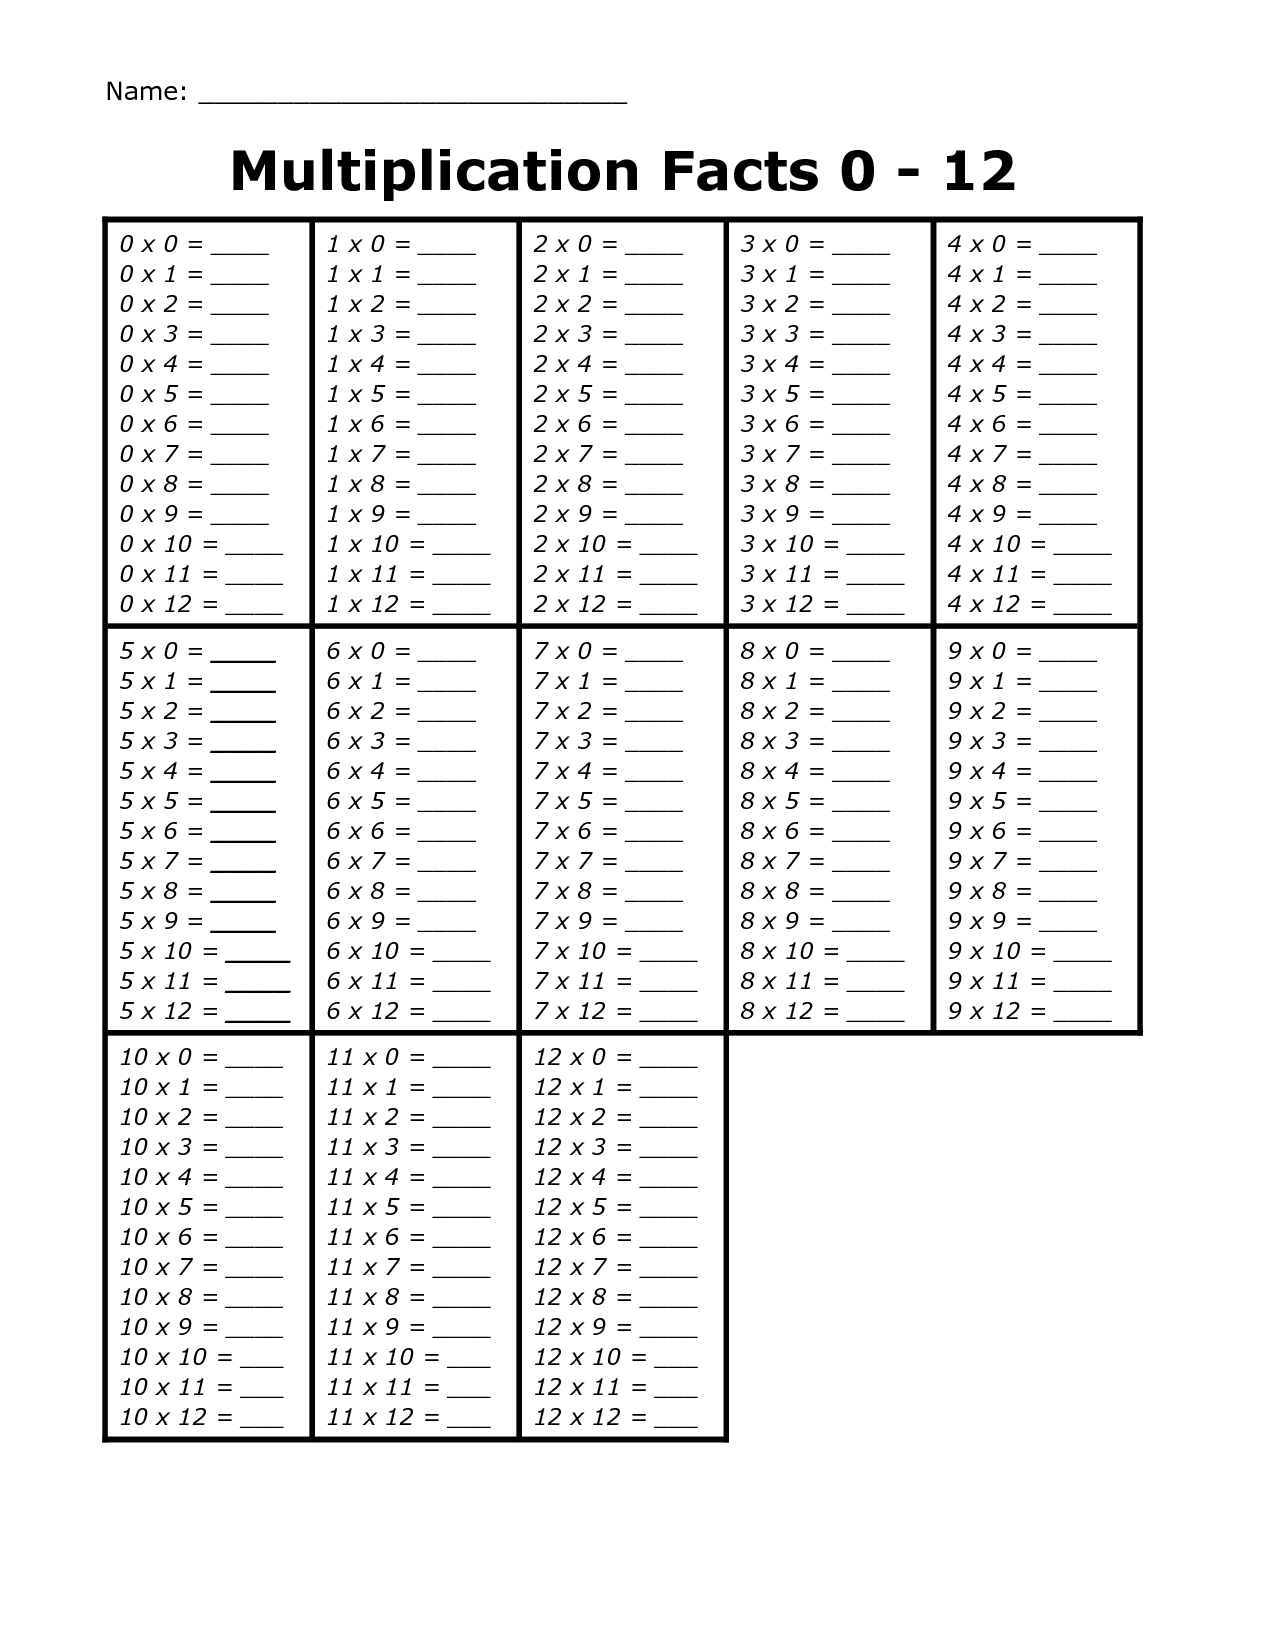 Printable Multiplication Facts 0 12 | Multiplication Facts with Printable Blank Multiplication Table 0-12